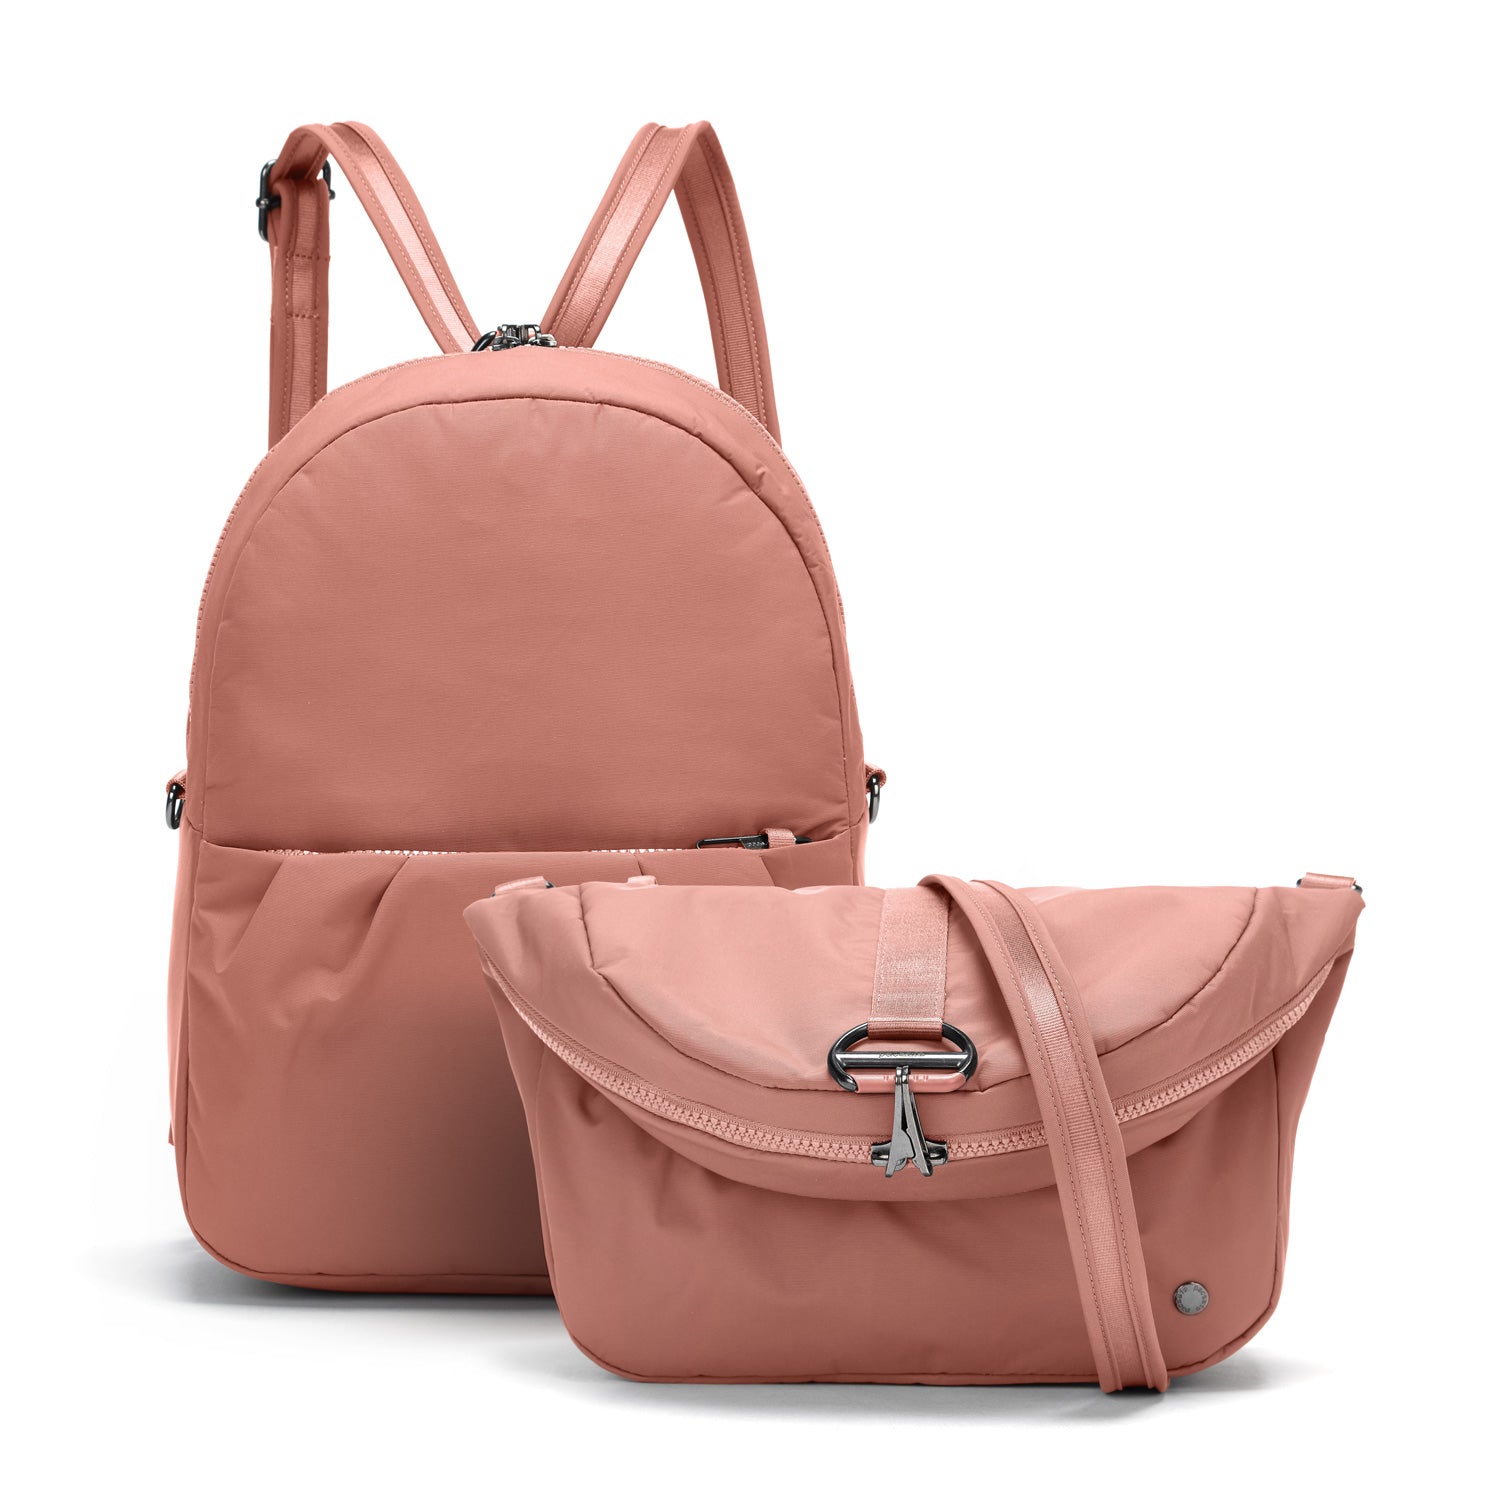 Pacsafe - CX Convertible Backpack - Rose-1